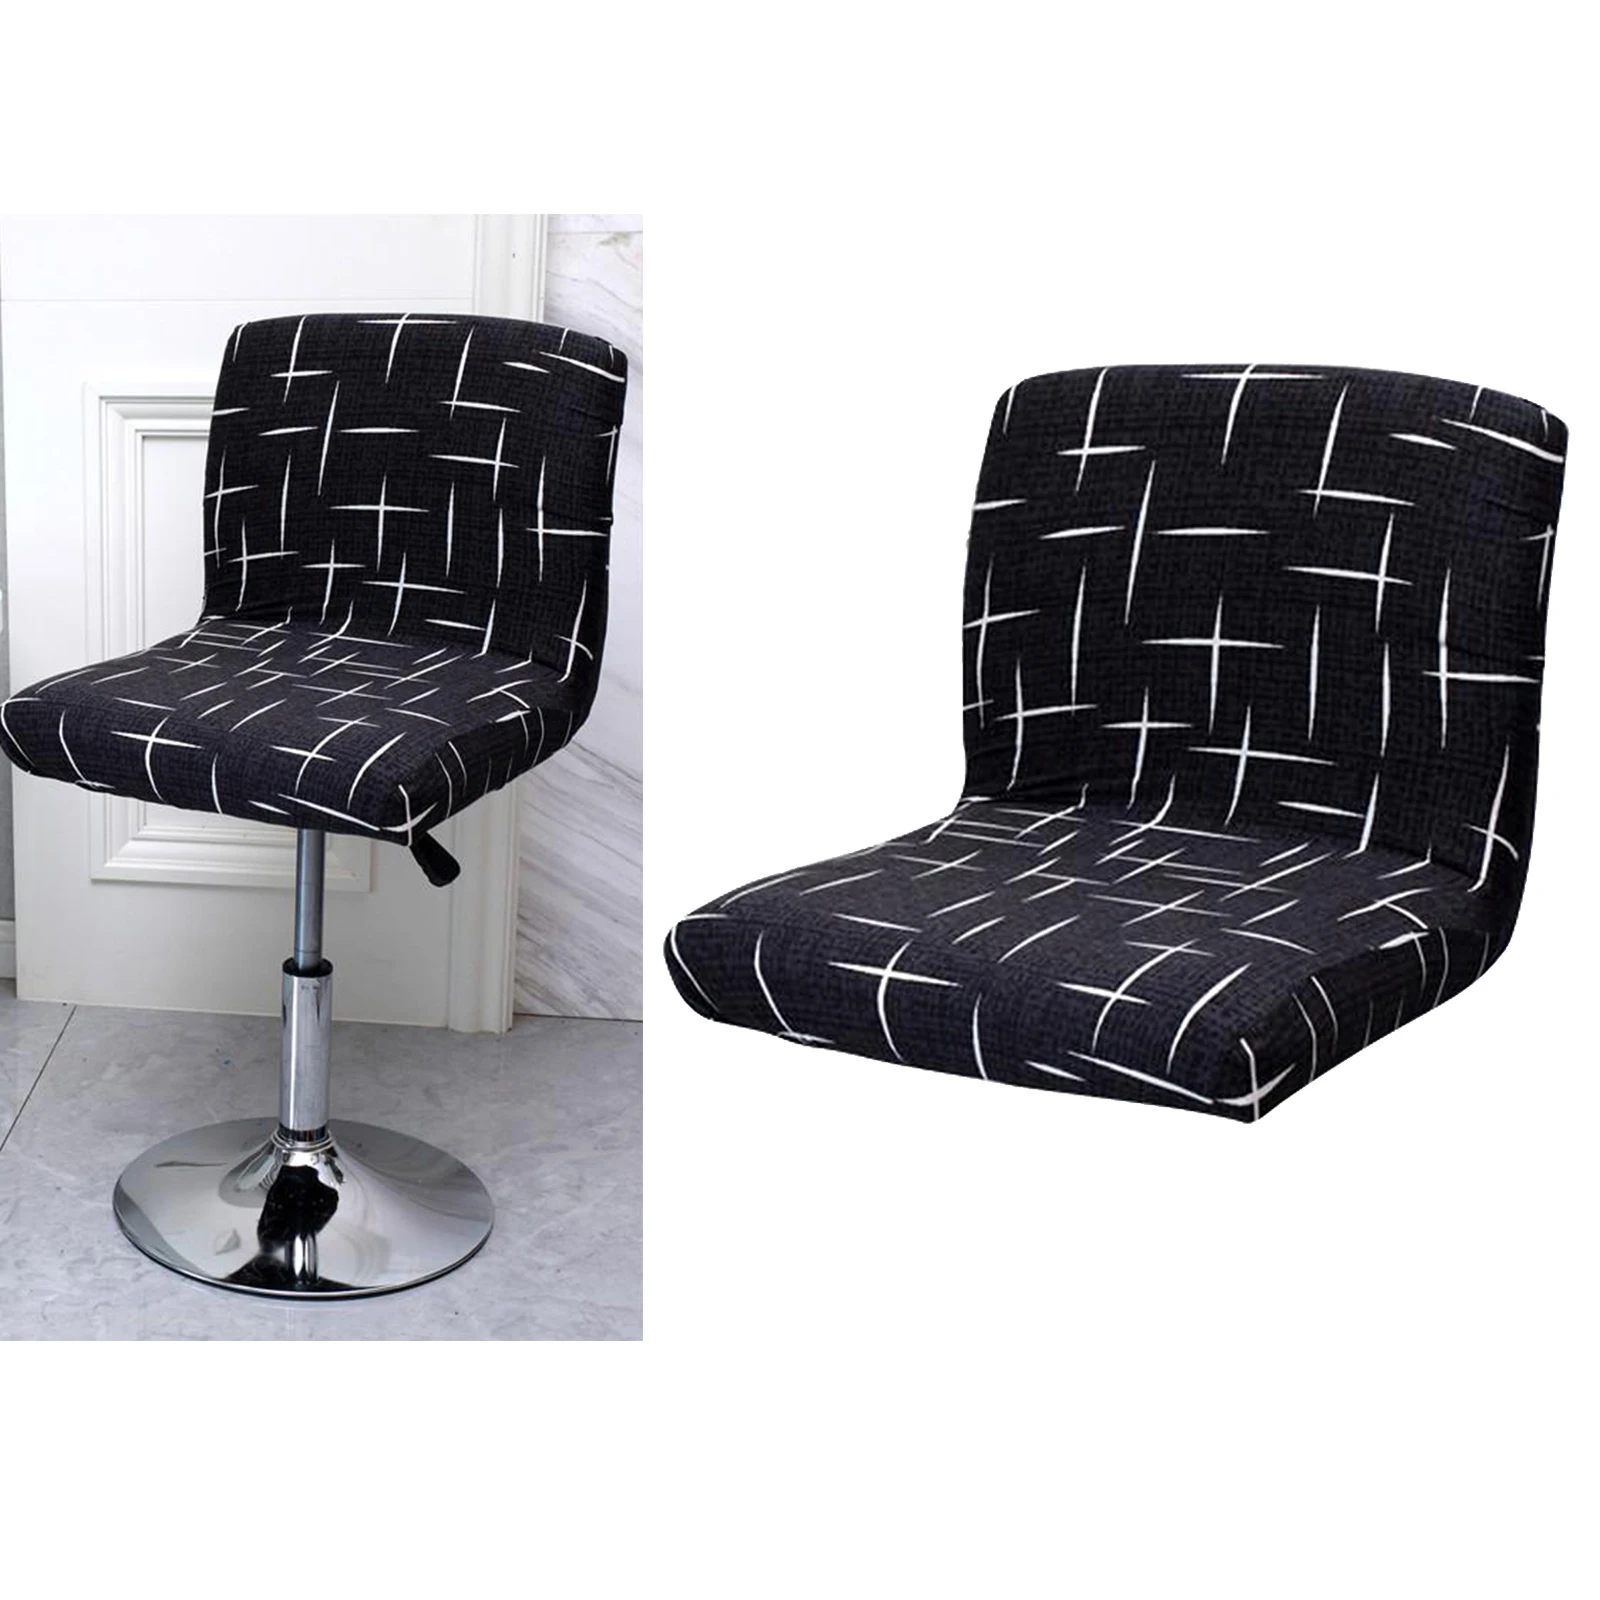 Bar Stool Chair Slipcover 4 Chair And Sofa Covers